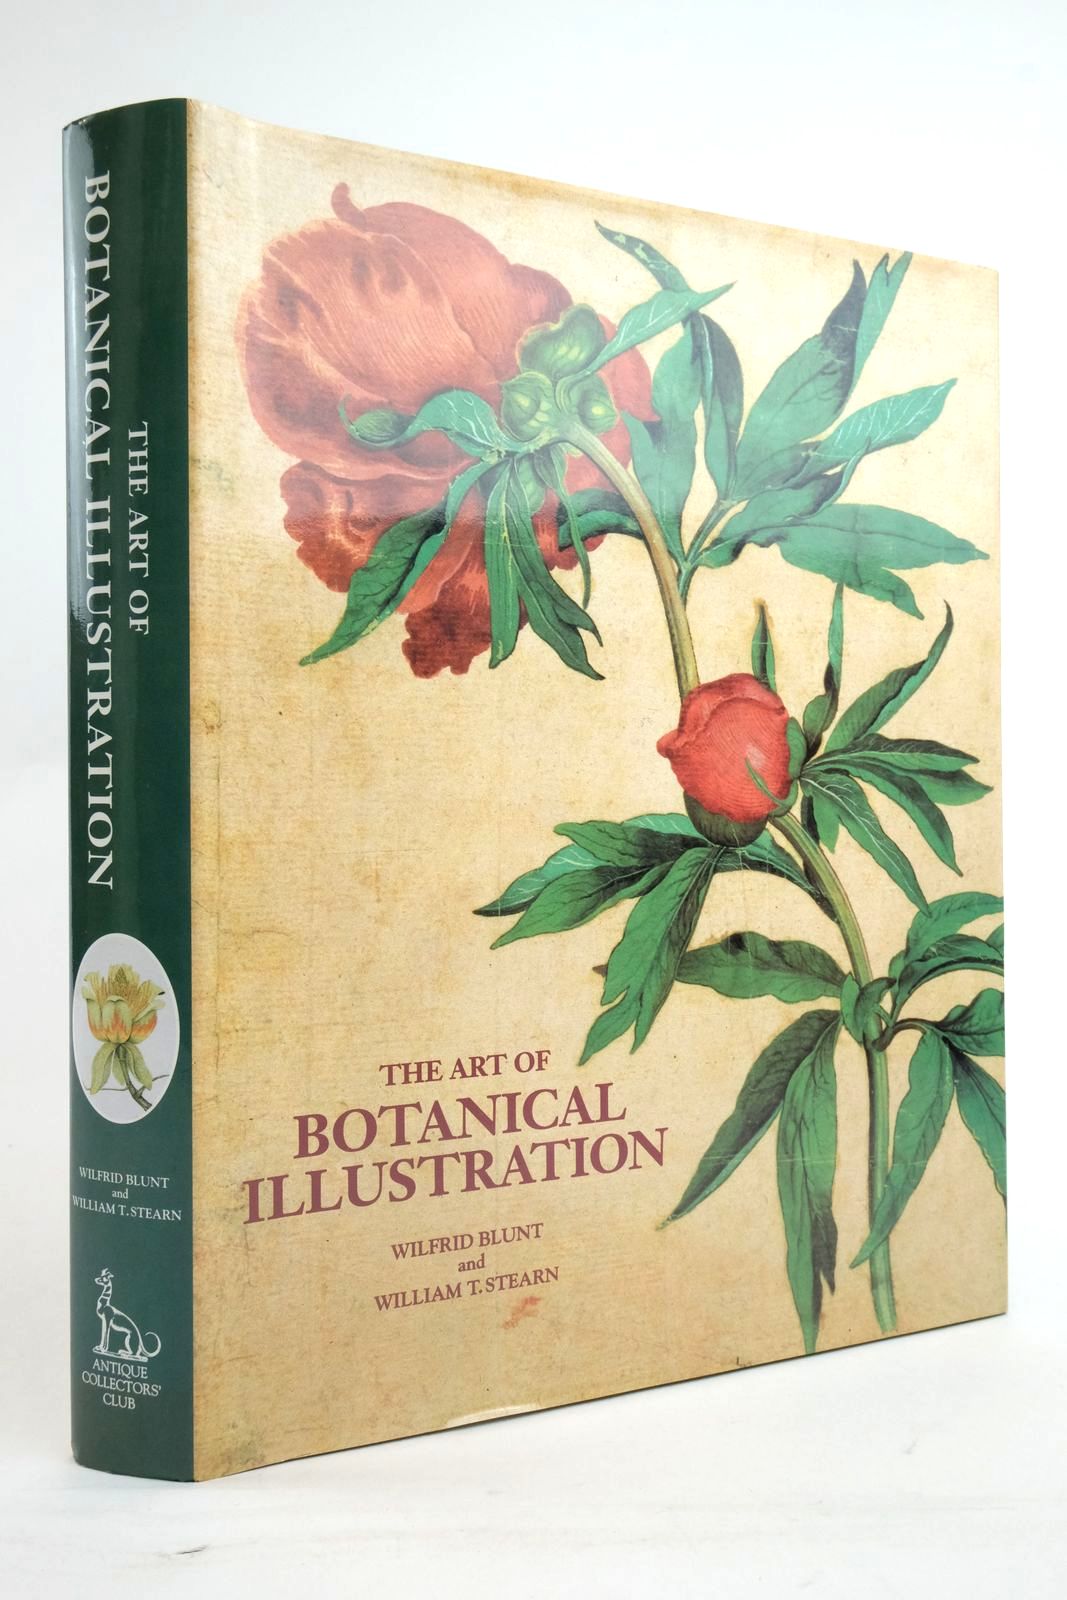 Photo of THE ART OF BOTANICAL ILLUSTRATION written by Blunt, Wilfrid Stearn, William T. published by Antique Collectors' Club (STOCK CODE: 2136441)  for sale by Stella & Rose's Books